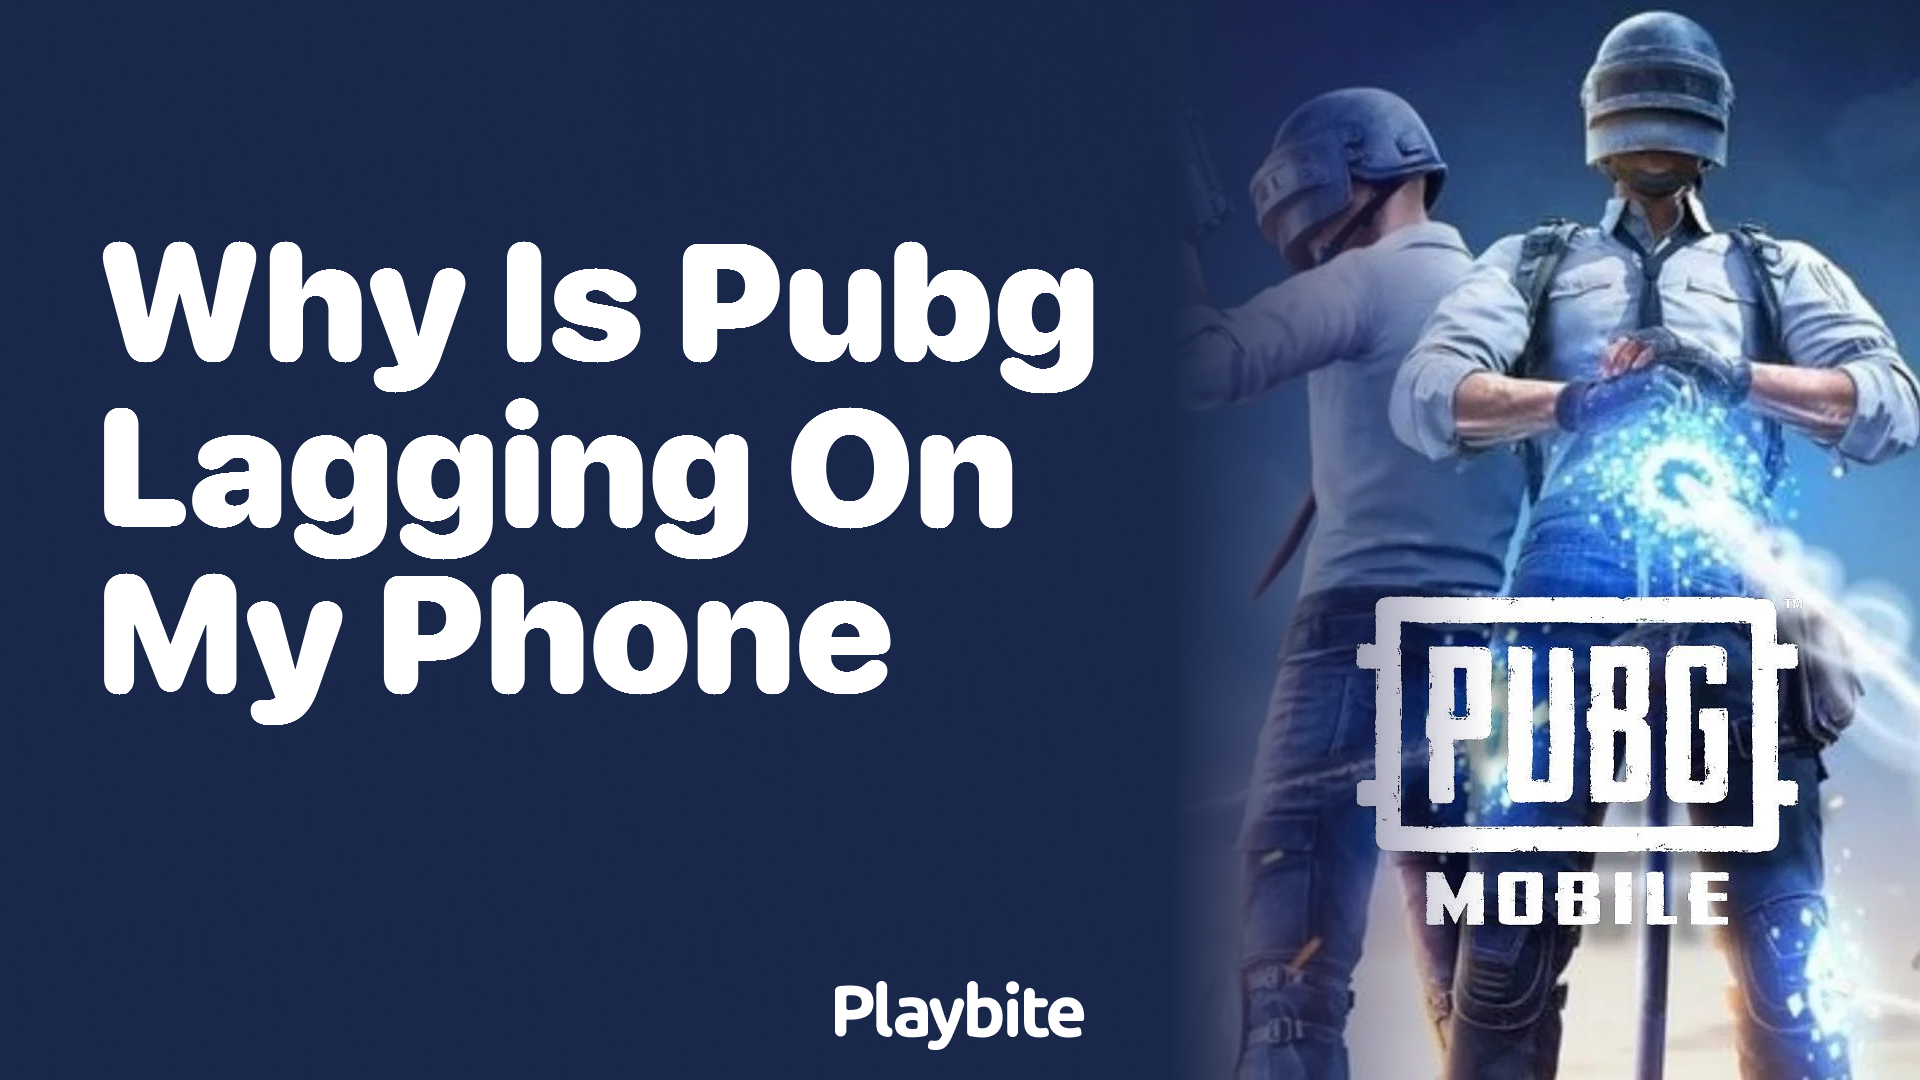 Why Is PUBG Lagging on My Phone? Let’s Find Out!